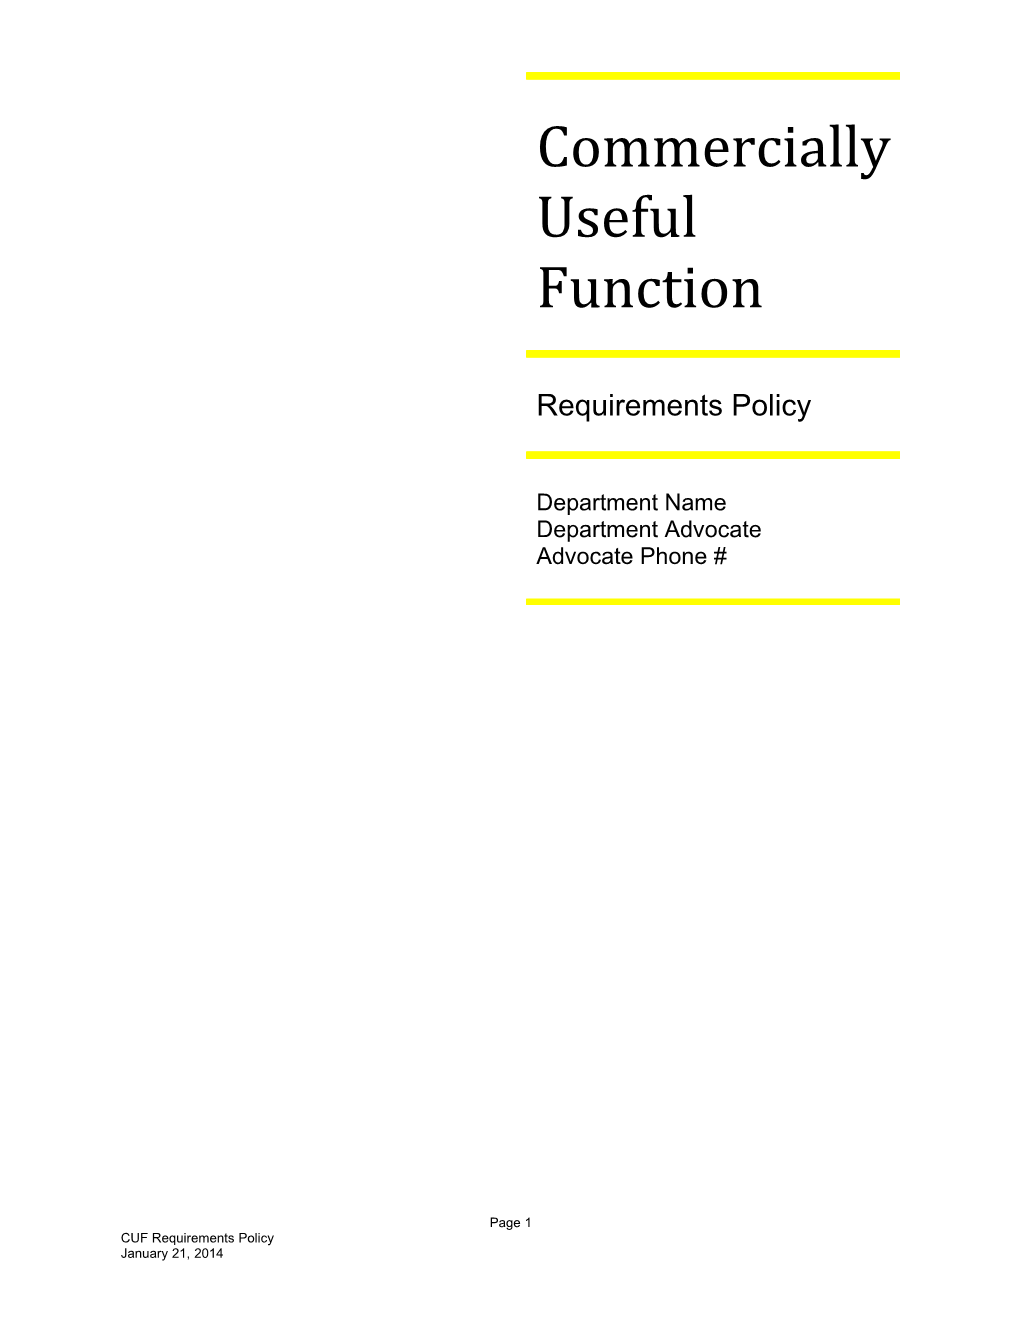 Commercially Useful Function